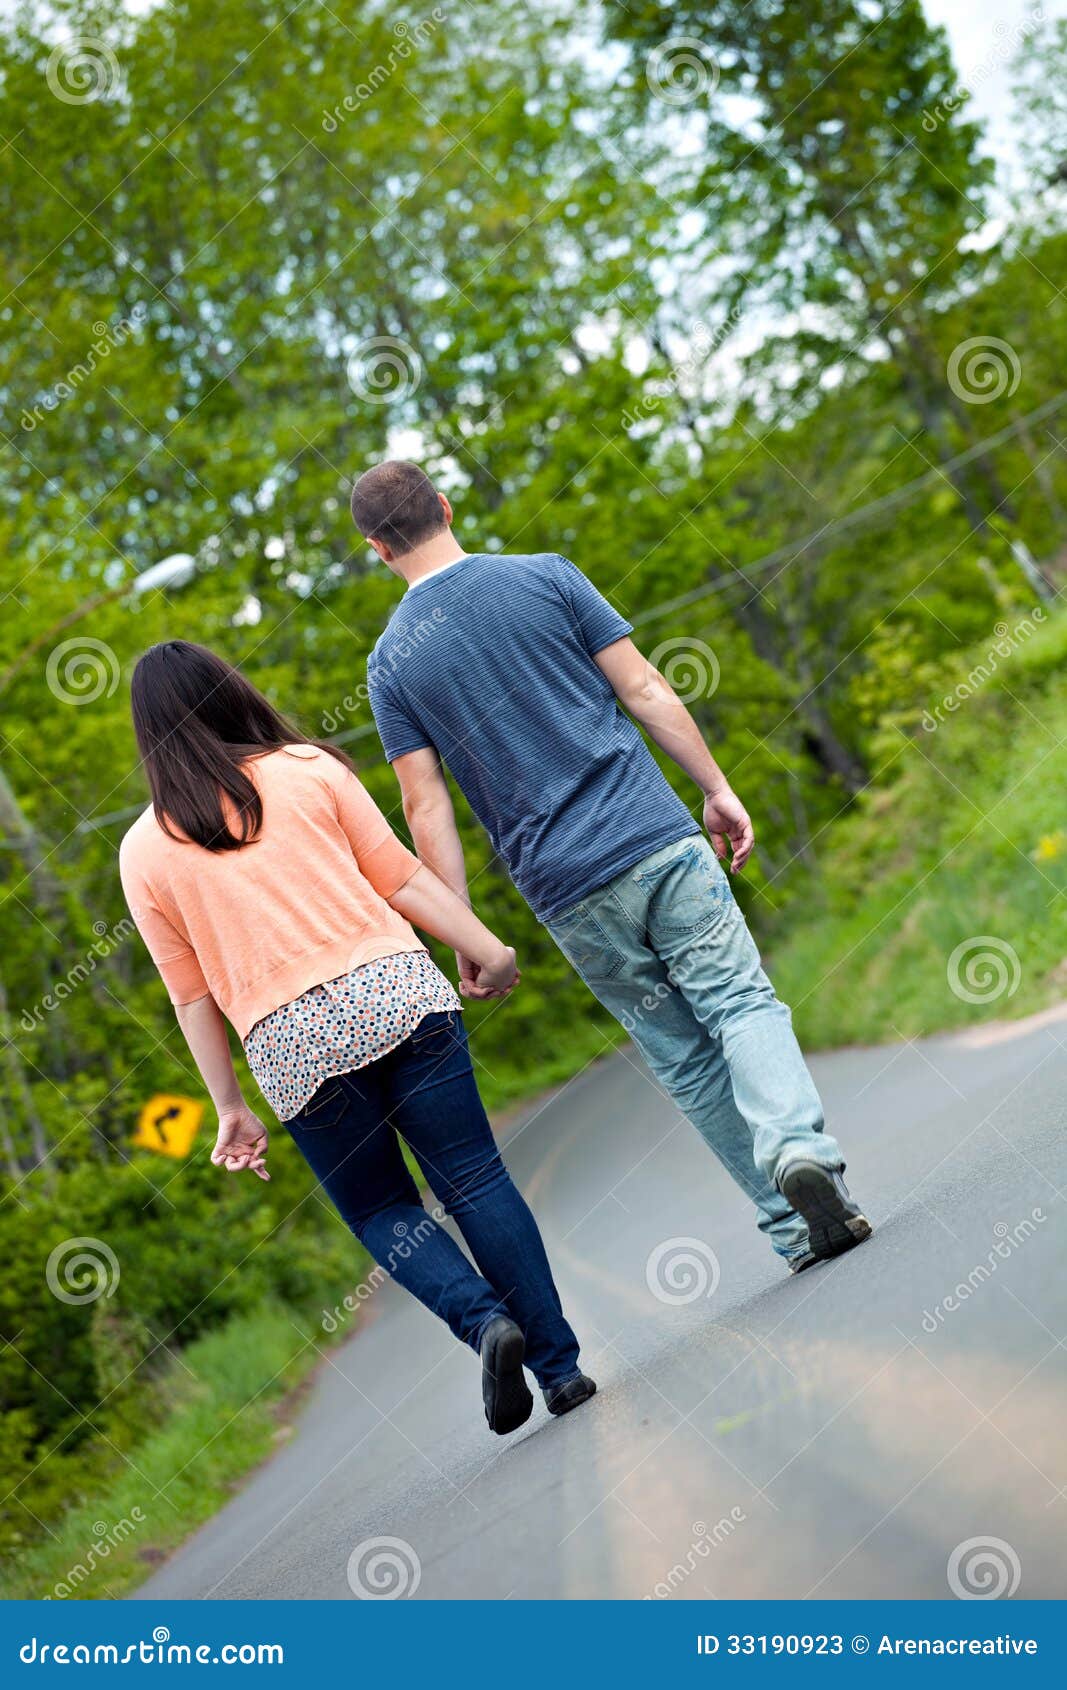 https://thumbs.dreamstime.com/z/man-woman-walking-street-young-happy-couple-enjoying-each-others-company-outdoors-down-empty-road-very-fitting-theme-33190923.jpg